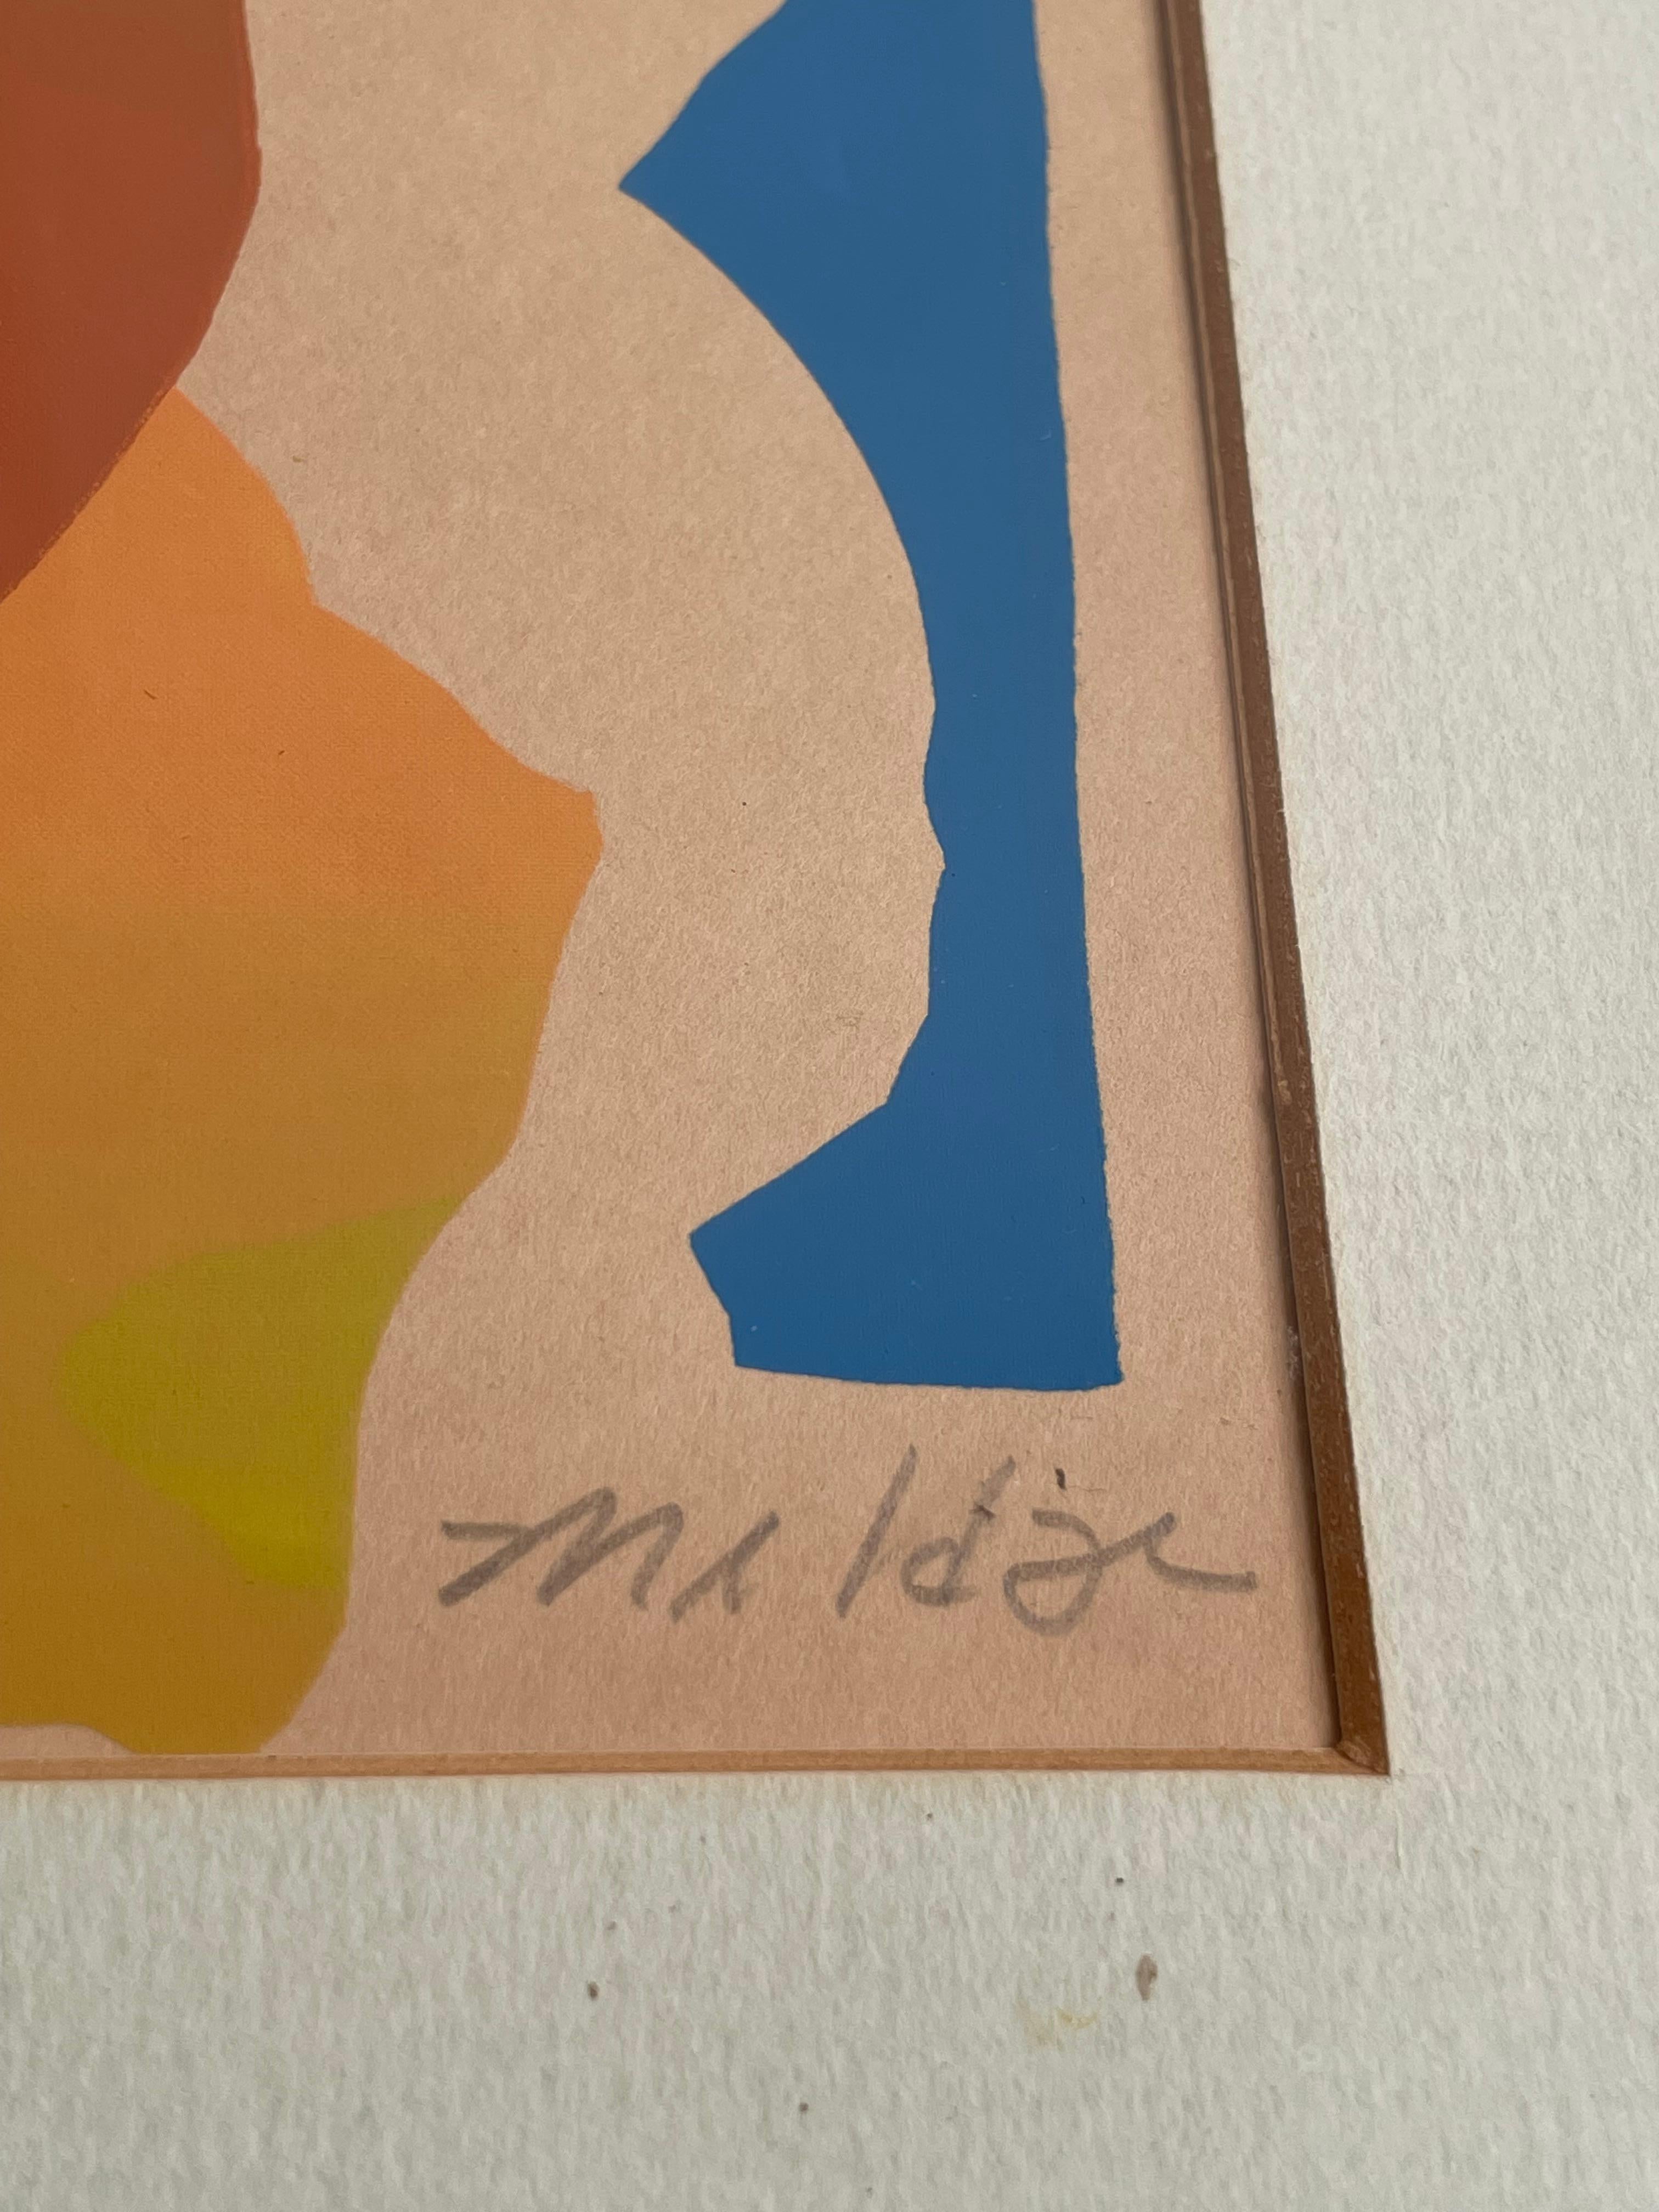 This lithograph is based on an artwork of the artist, Robert L. Mulder, who used a cut-out technique probably inspired by the favorite work of Henri Matisse.
He painted the rolls of paper, and then weighted them down so they dried flat. From there,